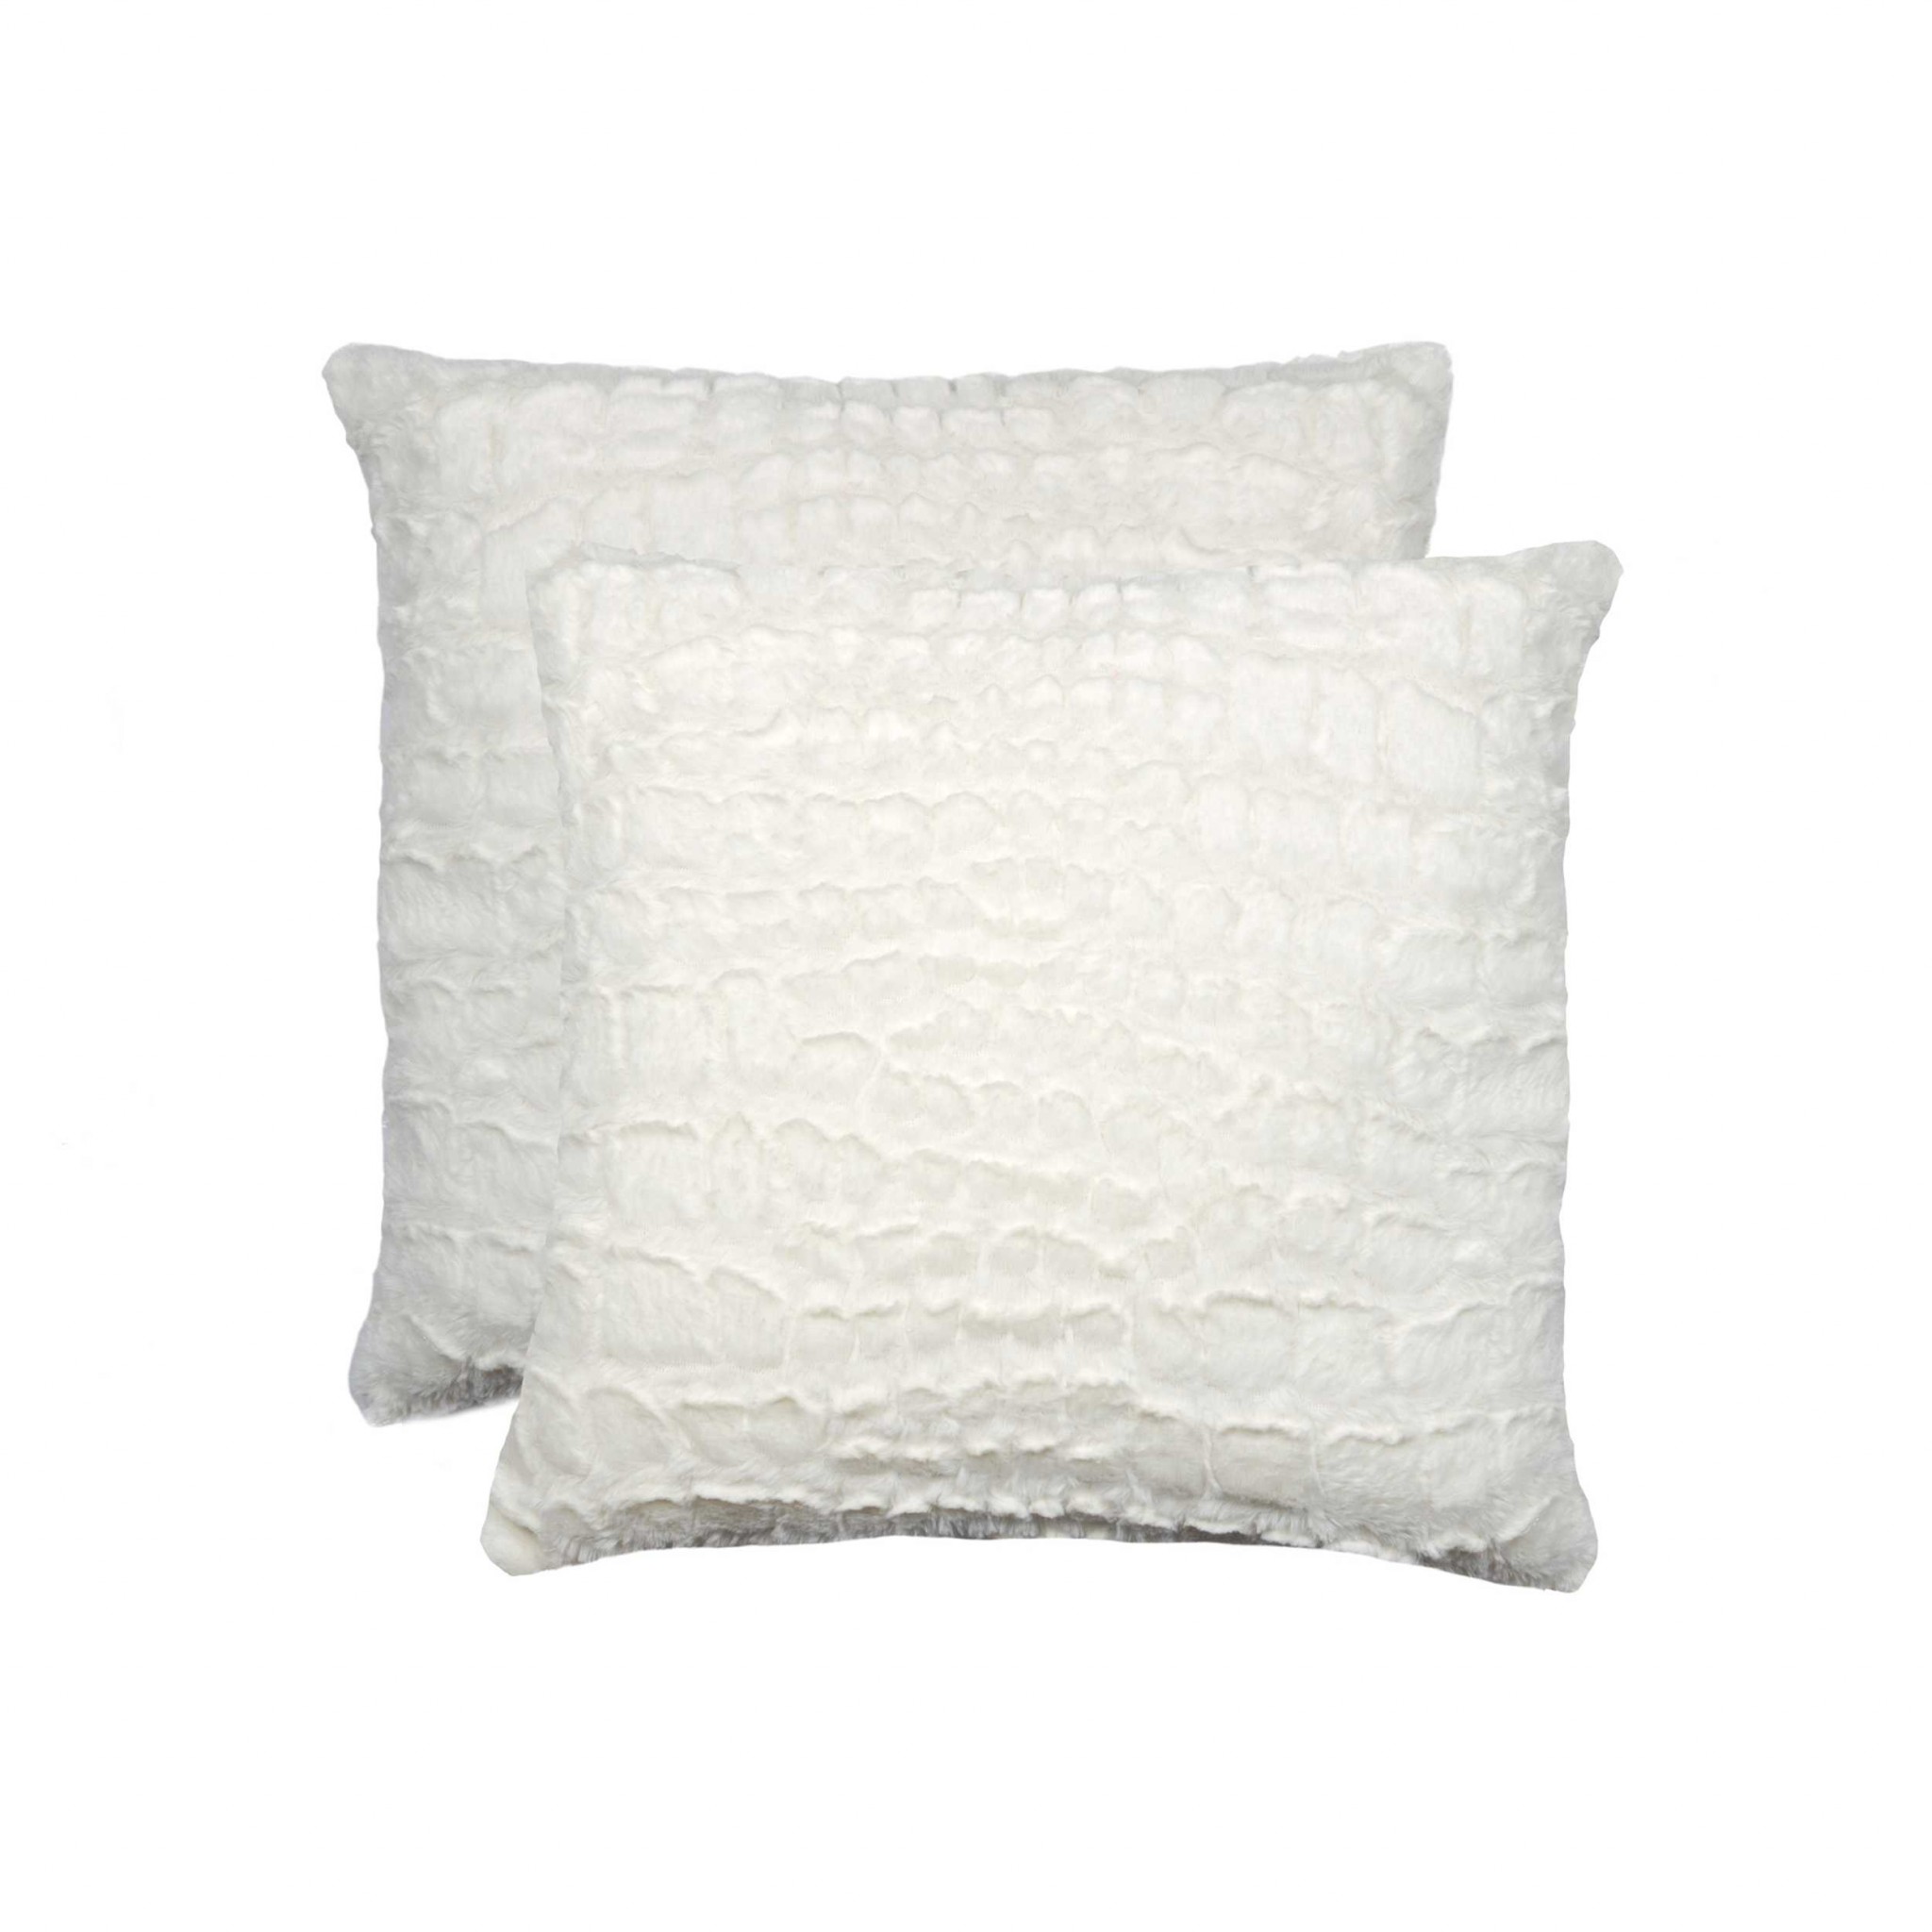 18" x 18" x 5" Ivory Mink, Faux - Pillow 2-Pack